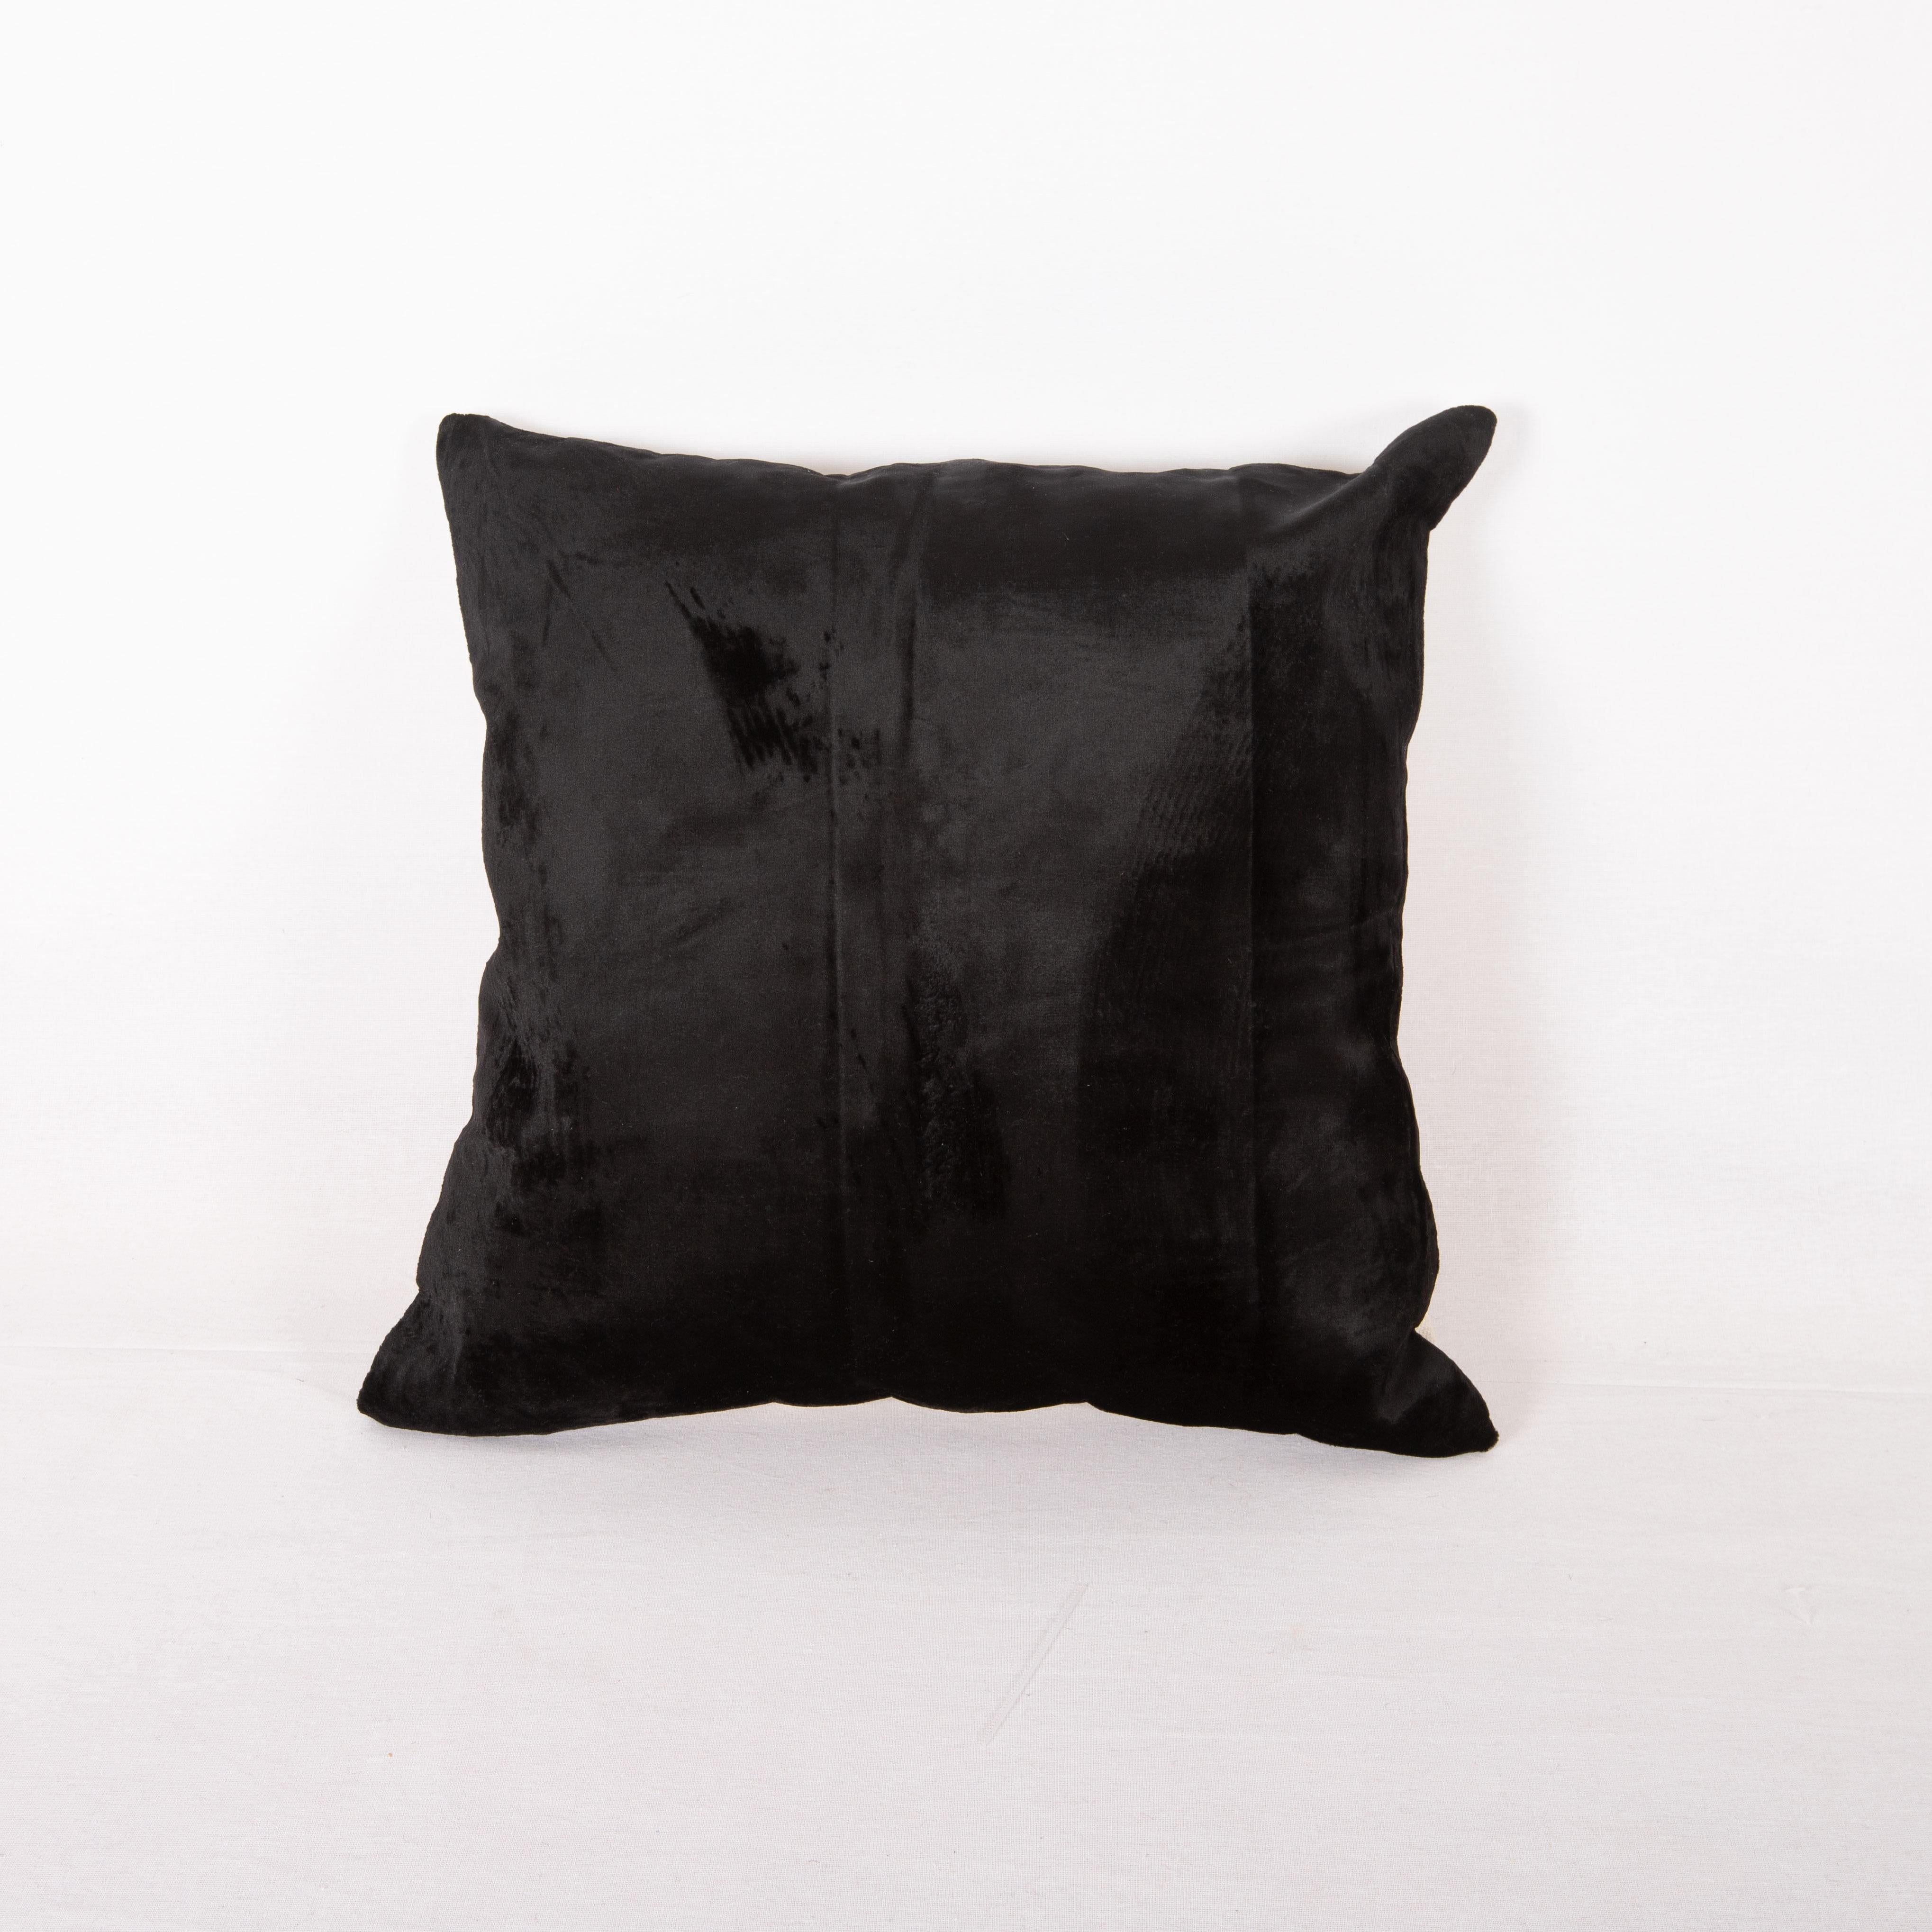 This pillow case is made from a Mid 20th C. Silk velvet, usually used for caftans/ chapans and quilts.

It does not come with an insert, but a bag made to size to accommodate insert materials.
Linen in the back.
Zipper closure.
Dry cleaning is